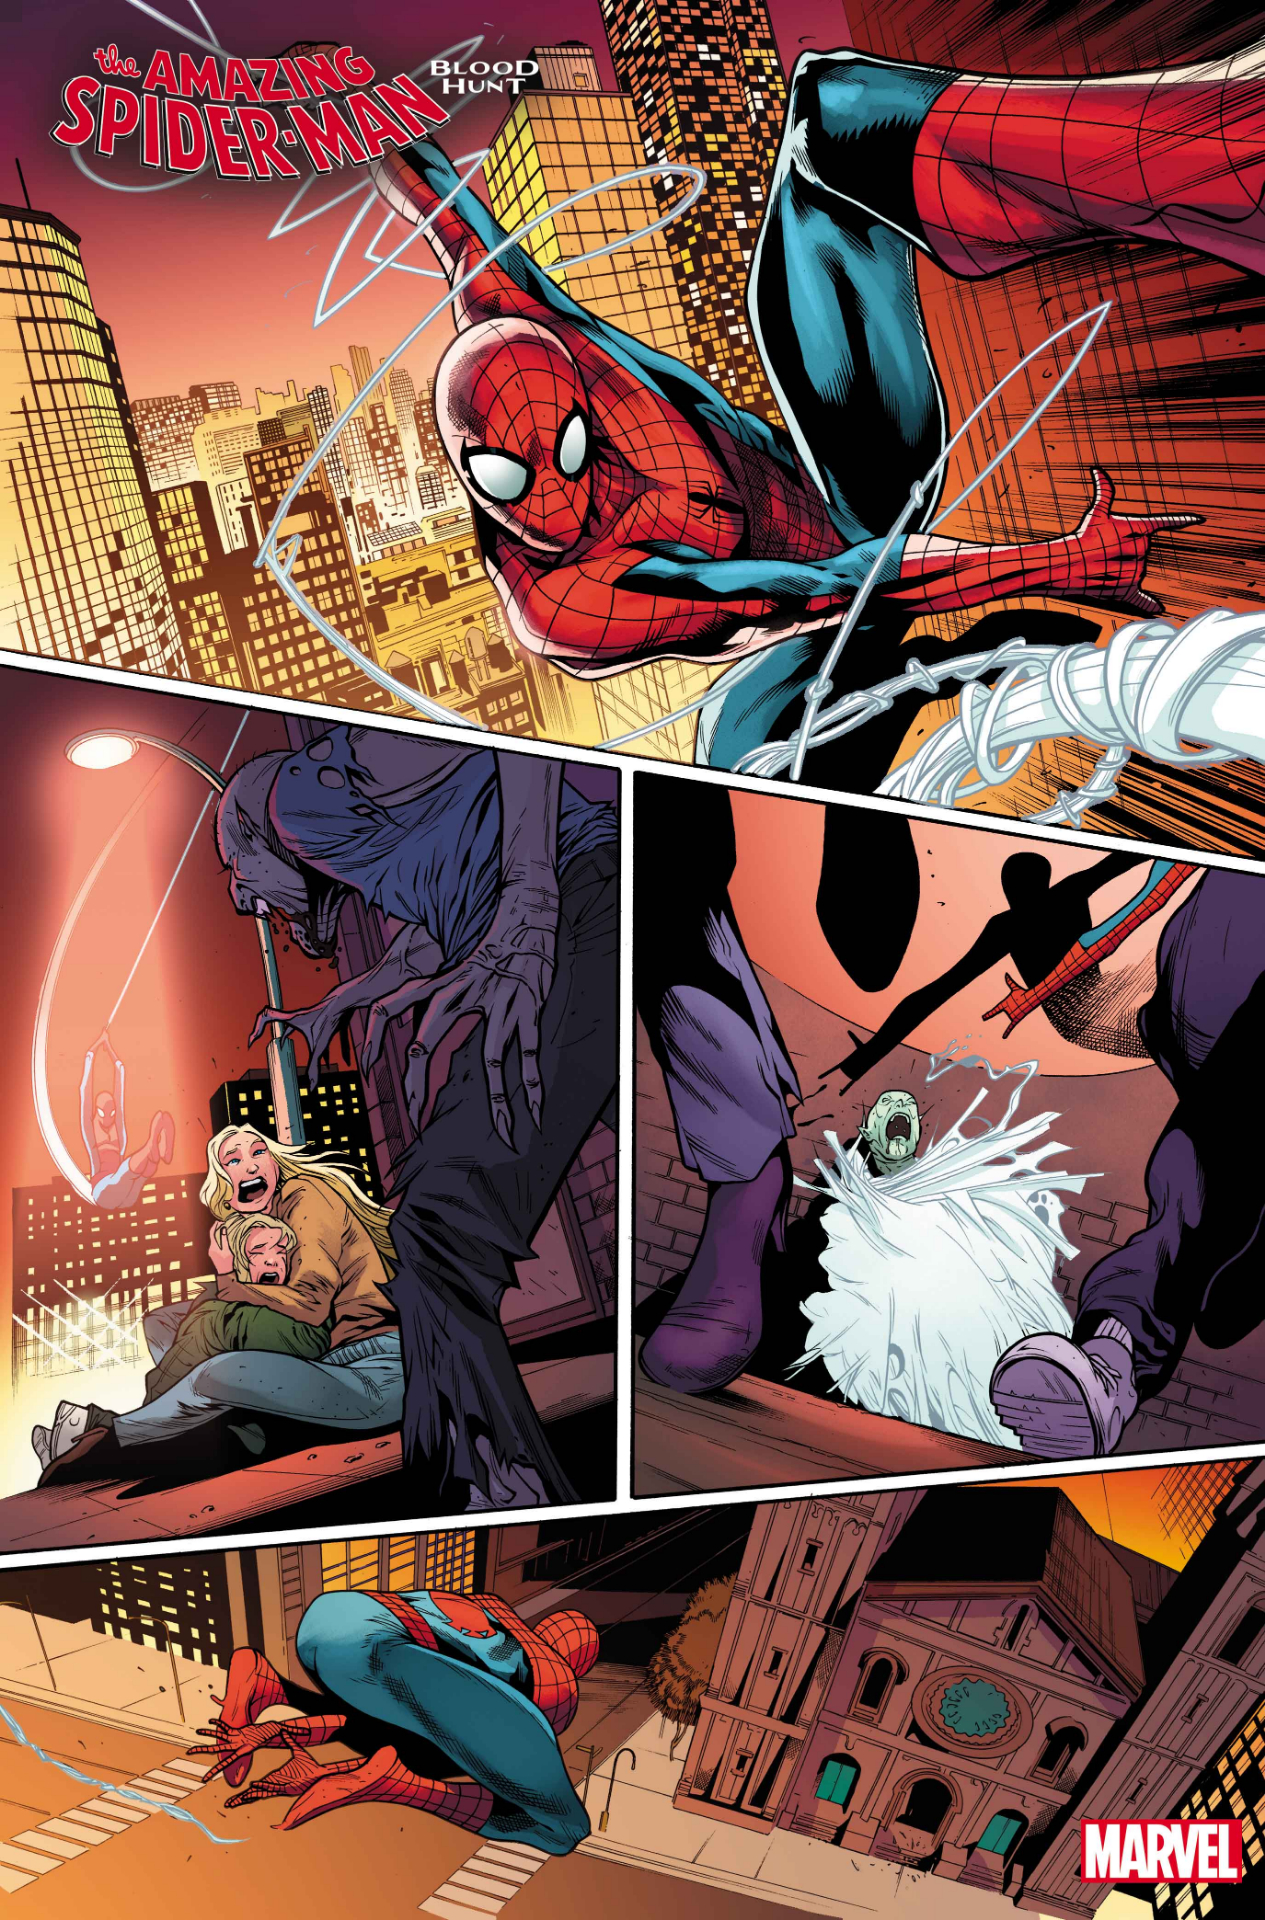 Amazing Spider-Man : Chasse au sang #1